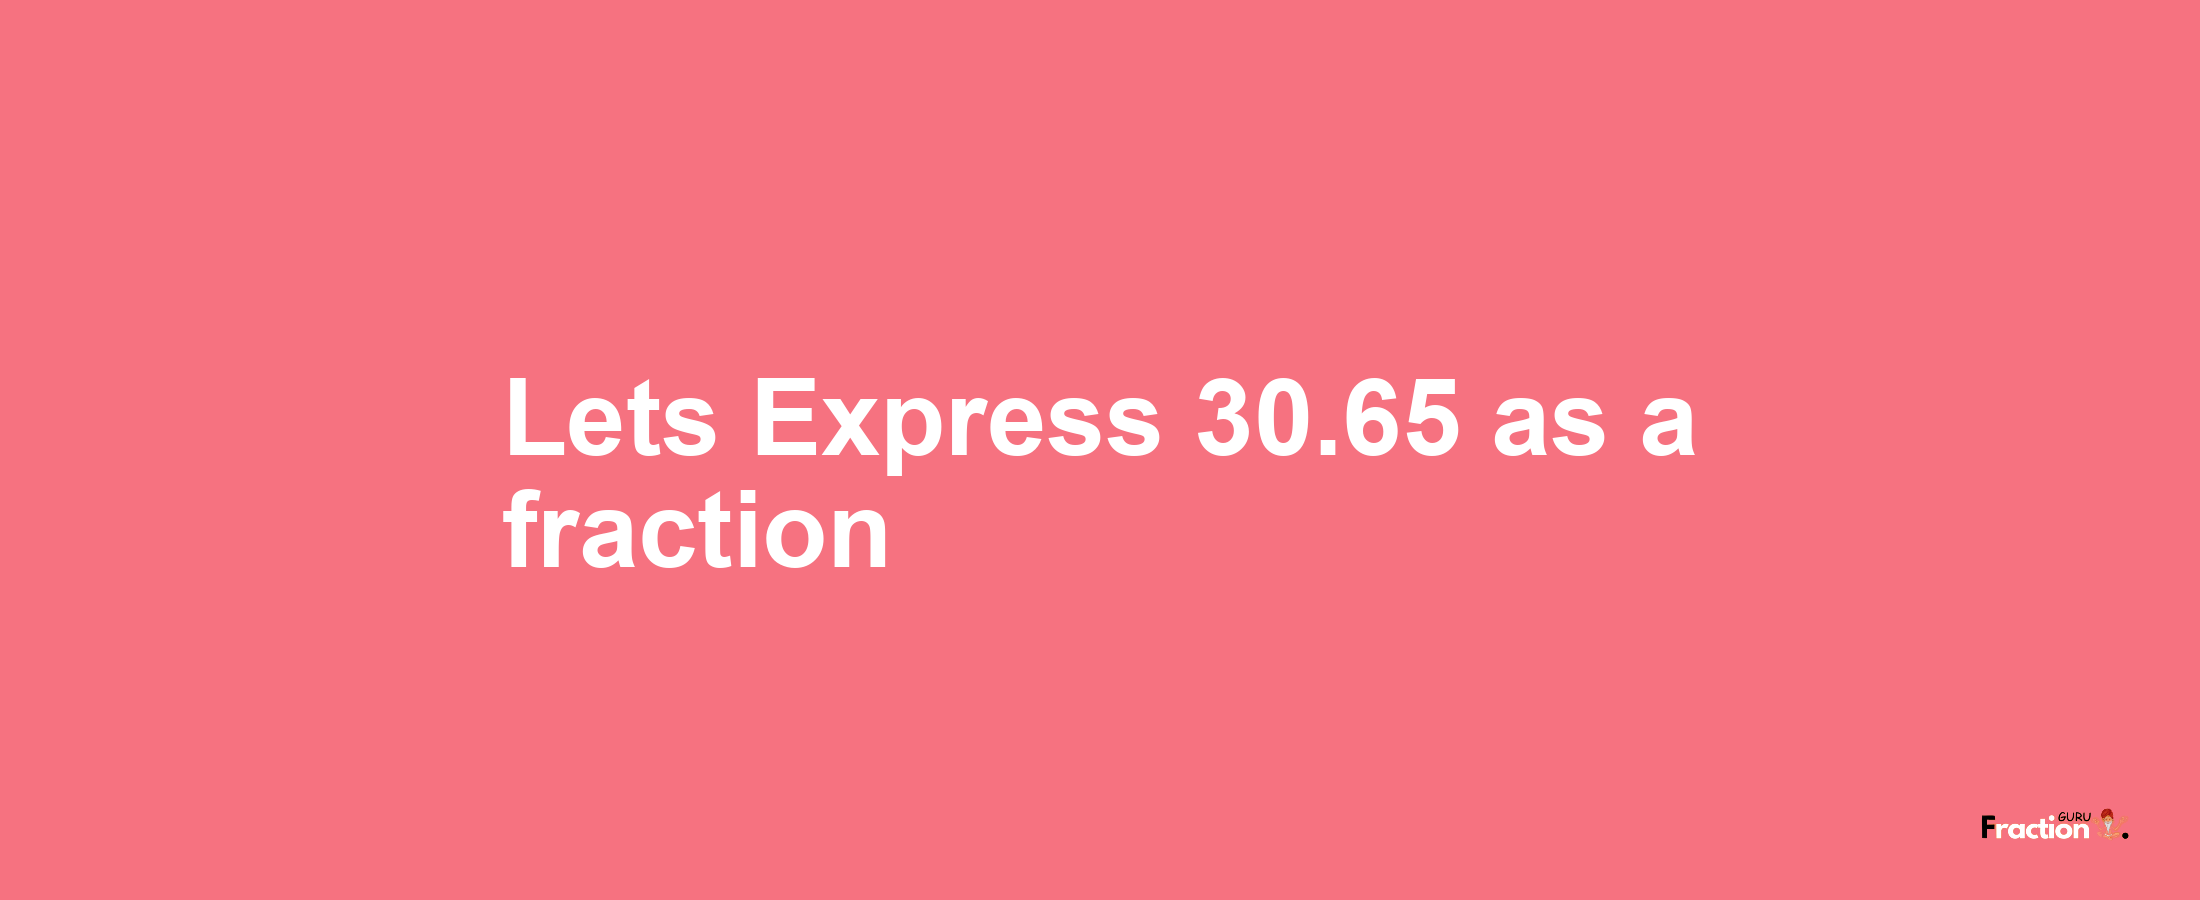 Lets Express 30.65 as afraction